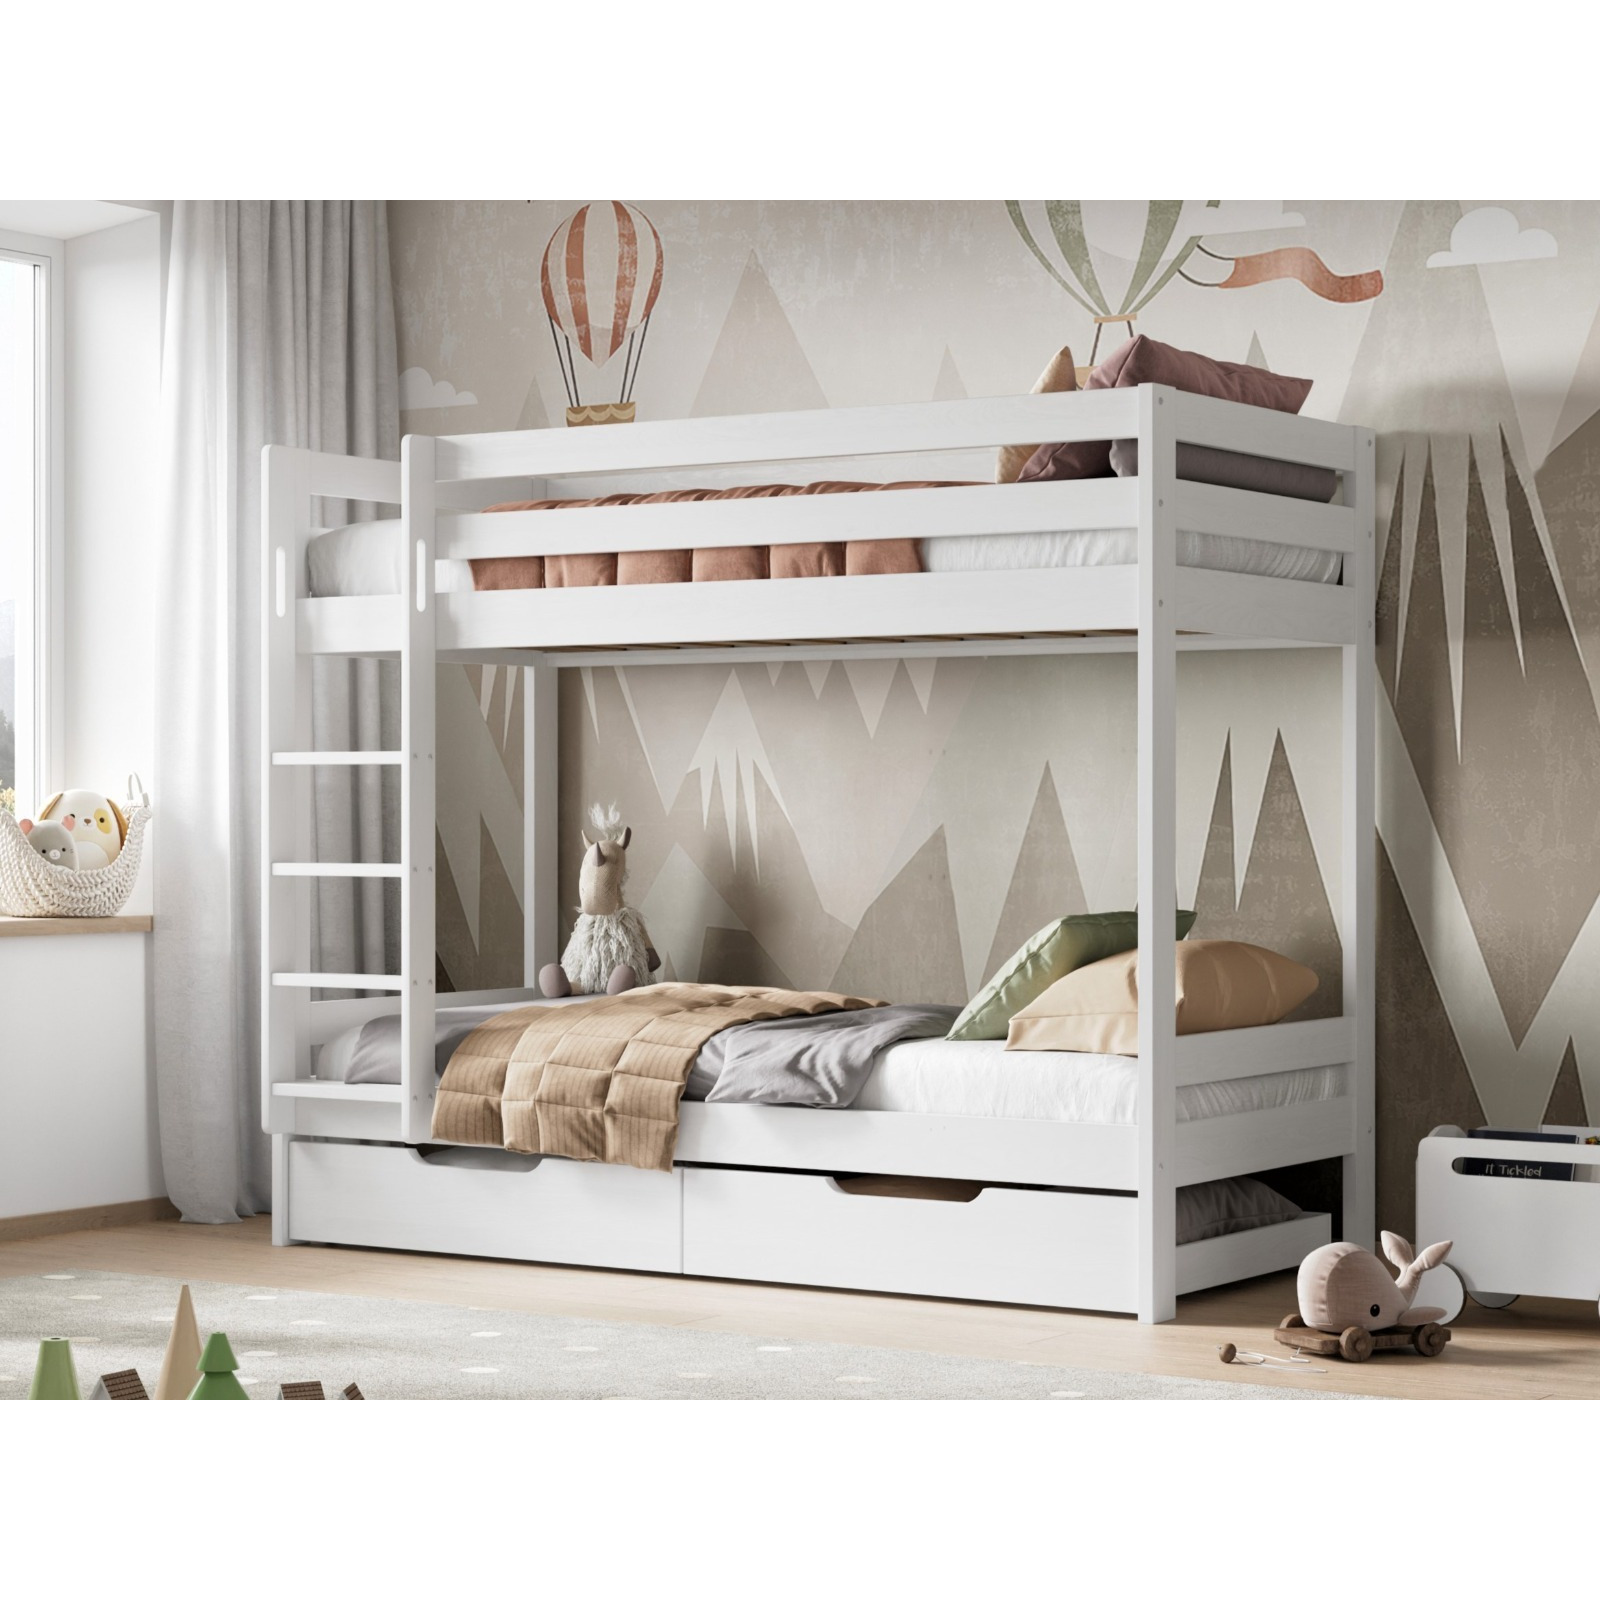 Noomi Nora Solid Wood Bunk Bed with Optional Storage (FSC-Certified) White - image 1